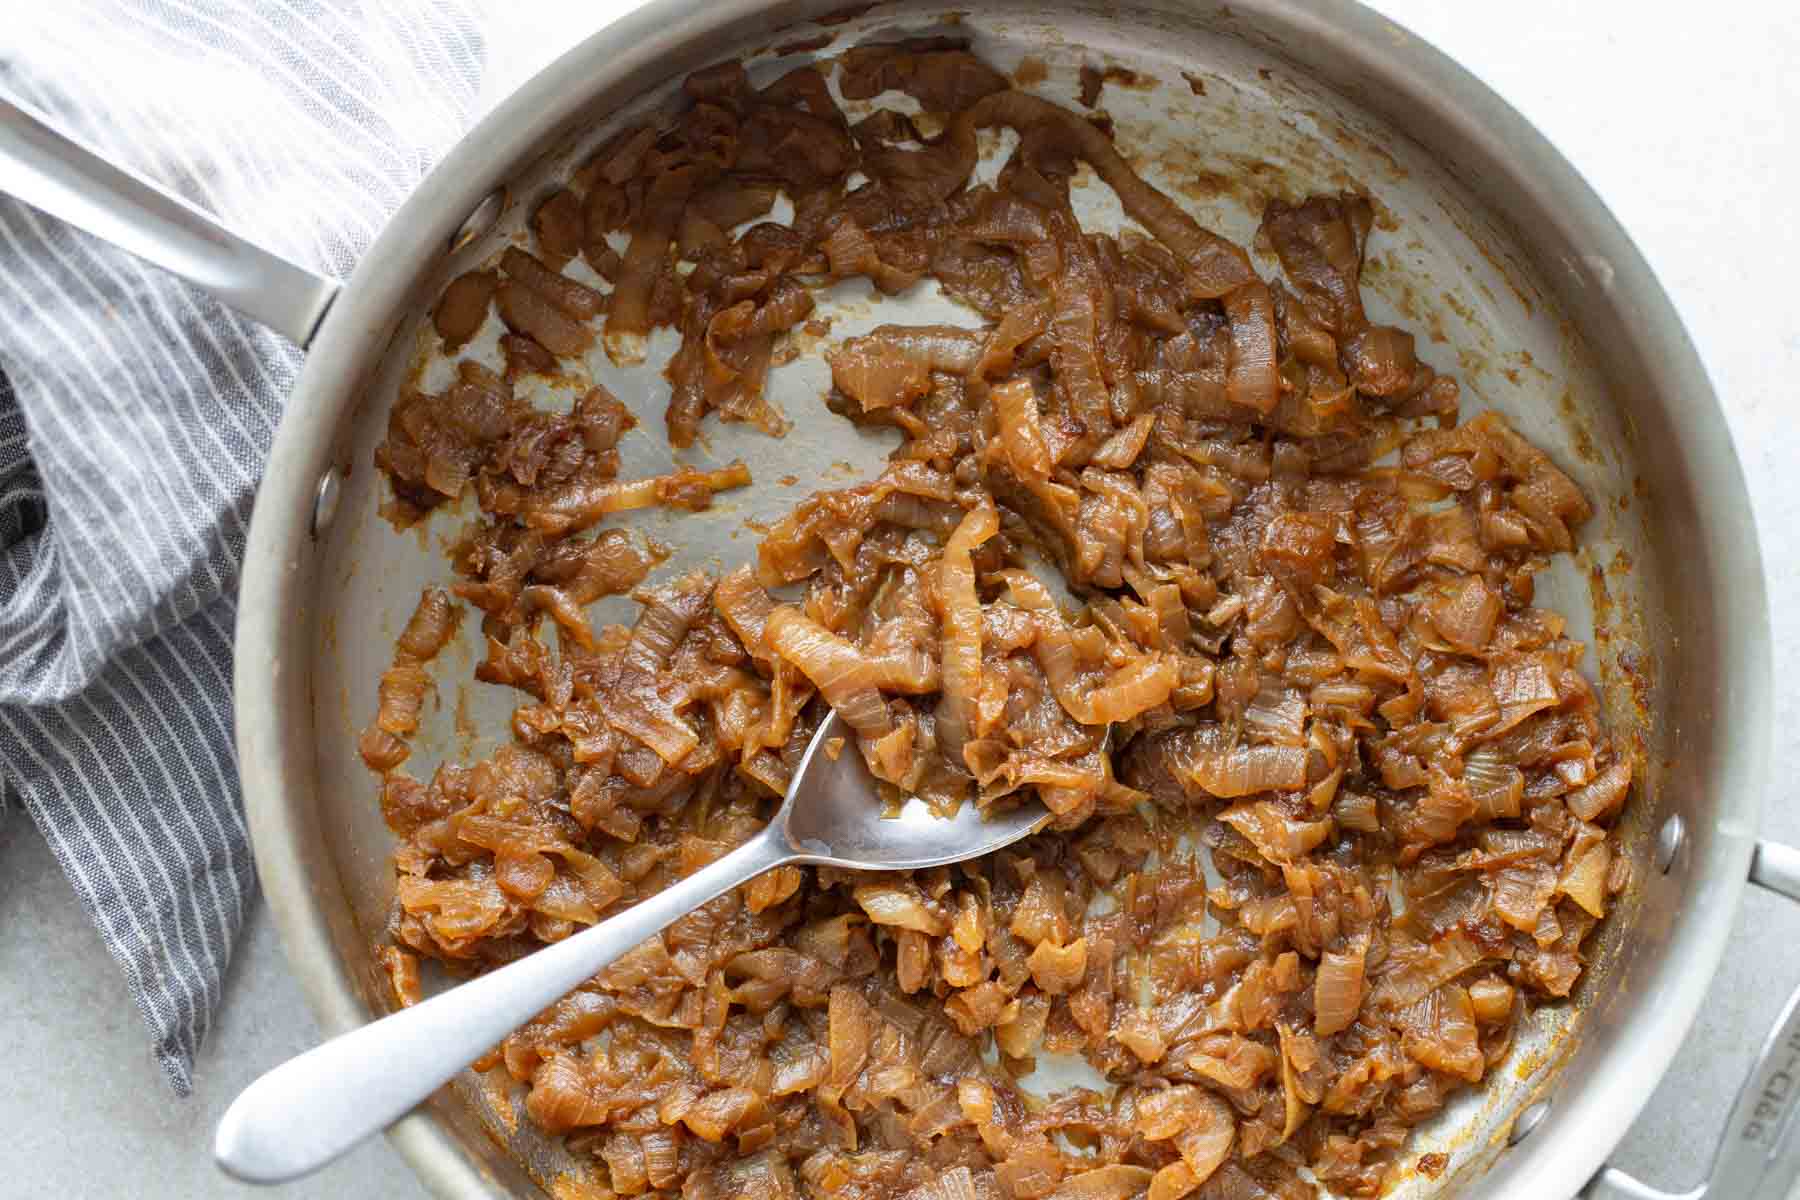 Caramelized onions in a frying pan with a spoon.